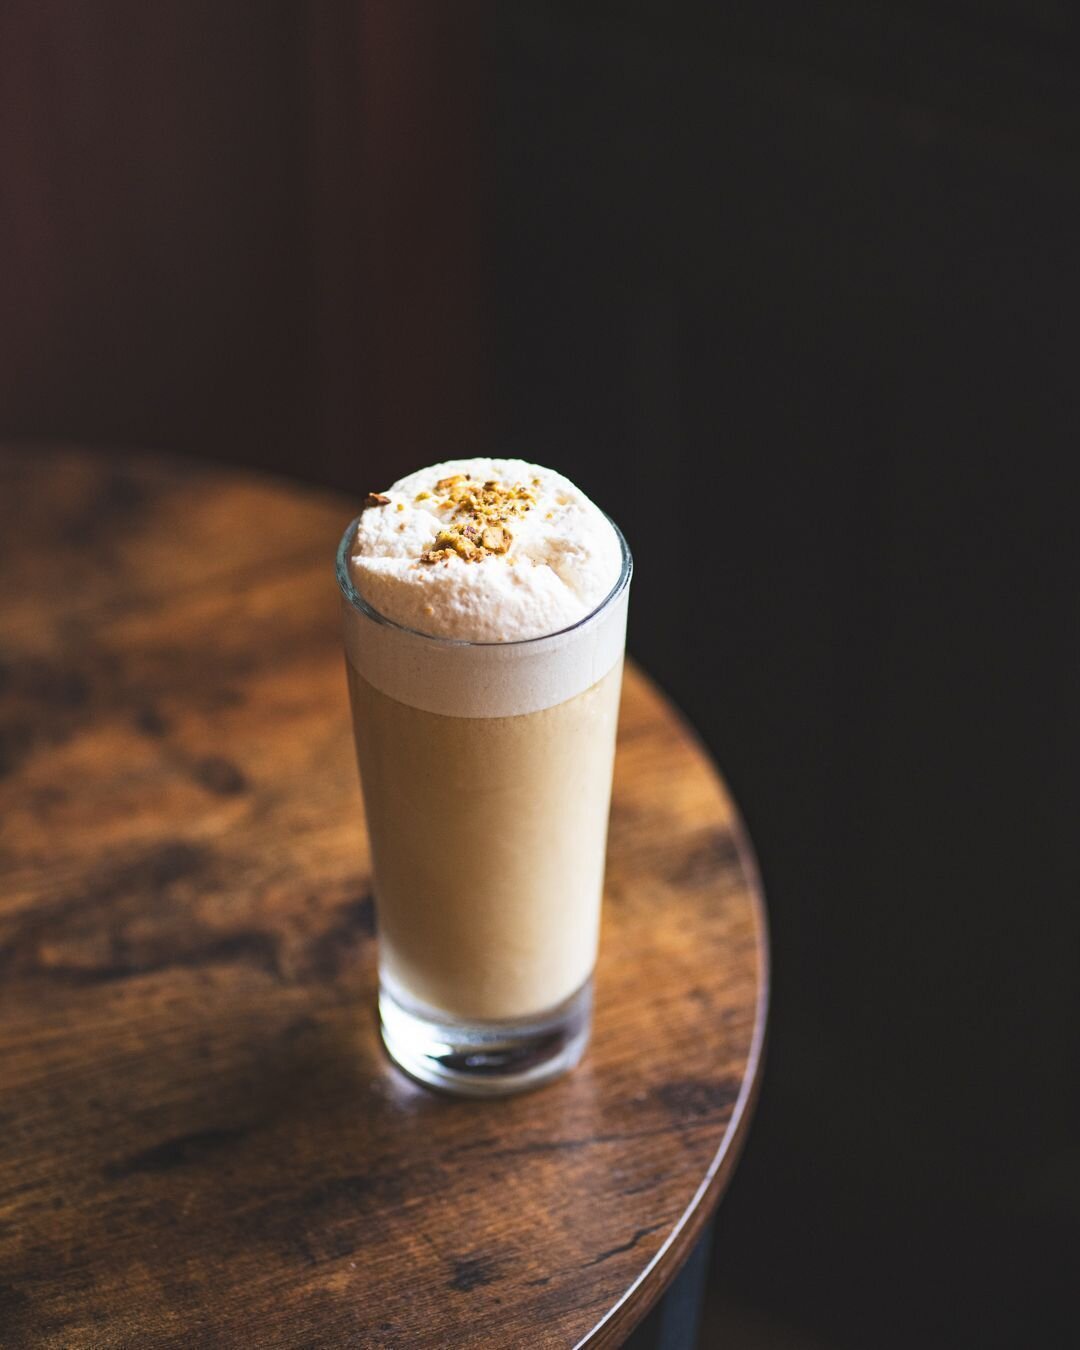 This little cutie is the Pistachio Gin Fizz from our brunch beverage menu. We combine gin, pistachio orgeat, yogurt, and egg white to create a rich and delicious beverage. 👀